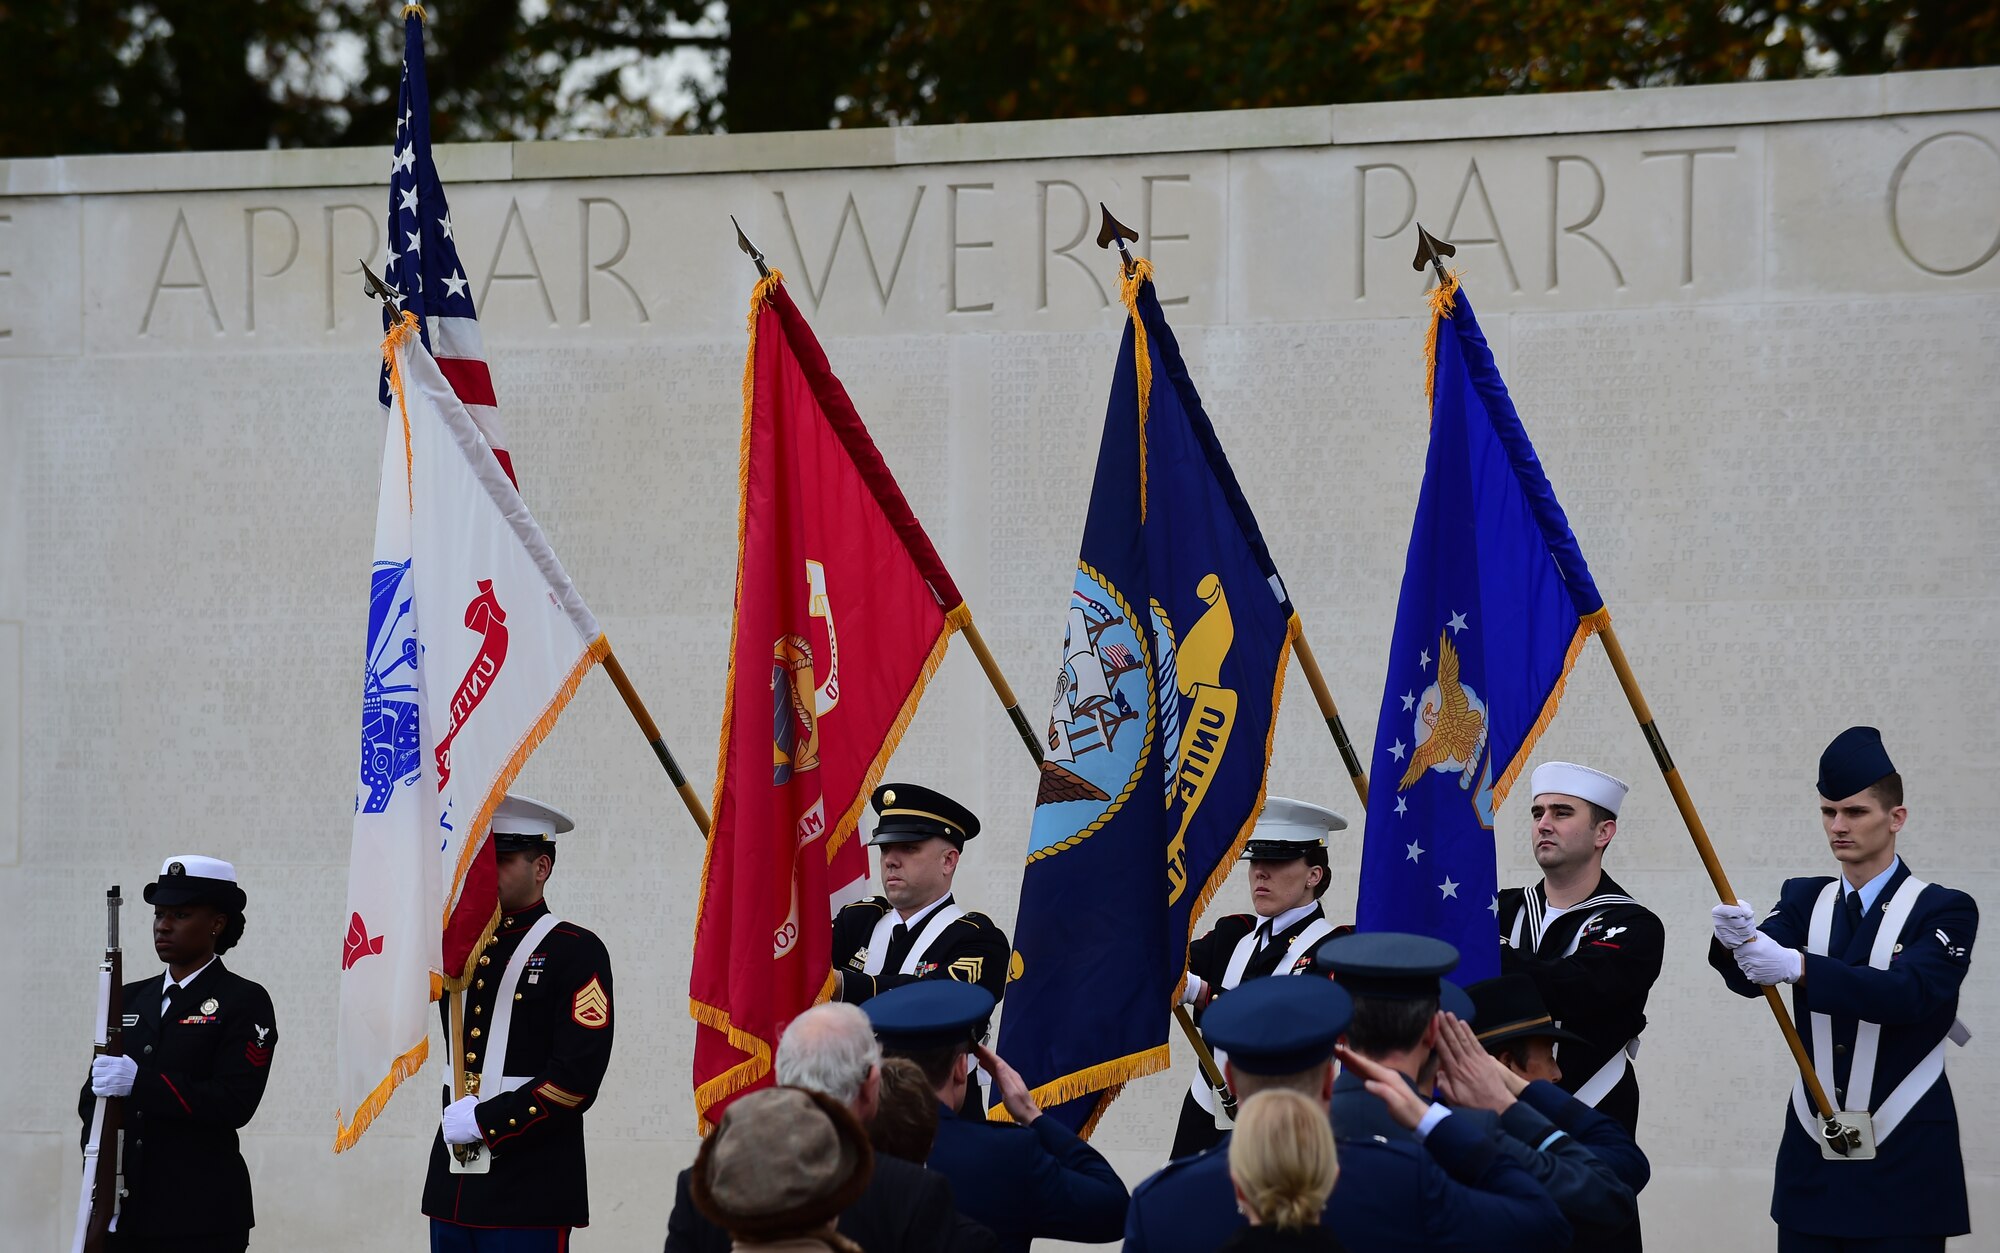 Members of the Joint Services honor guard present the colors during a Veterans Day ceremony at Cambridge American Cemetery, United Kingdom, Nov. 11, 2015. The ceremony honored both the 3,812 American Service members buried at the cemetery, along with veterans, past and present. (U.S. Air Force photo by Master Sgt. Chrissy Best/Released))